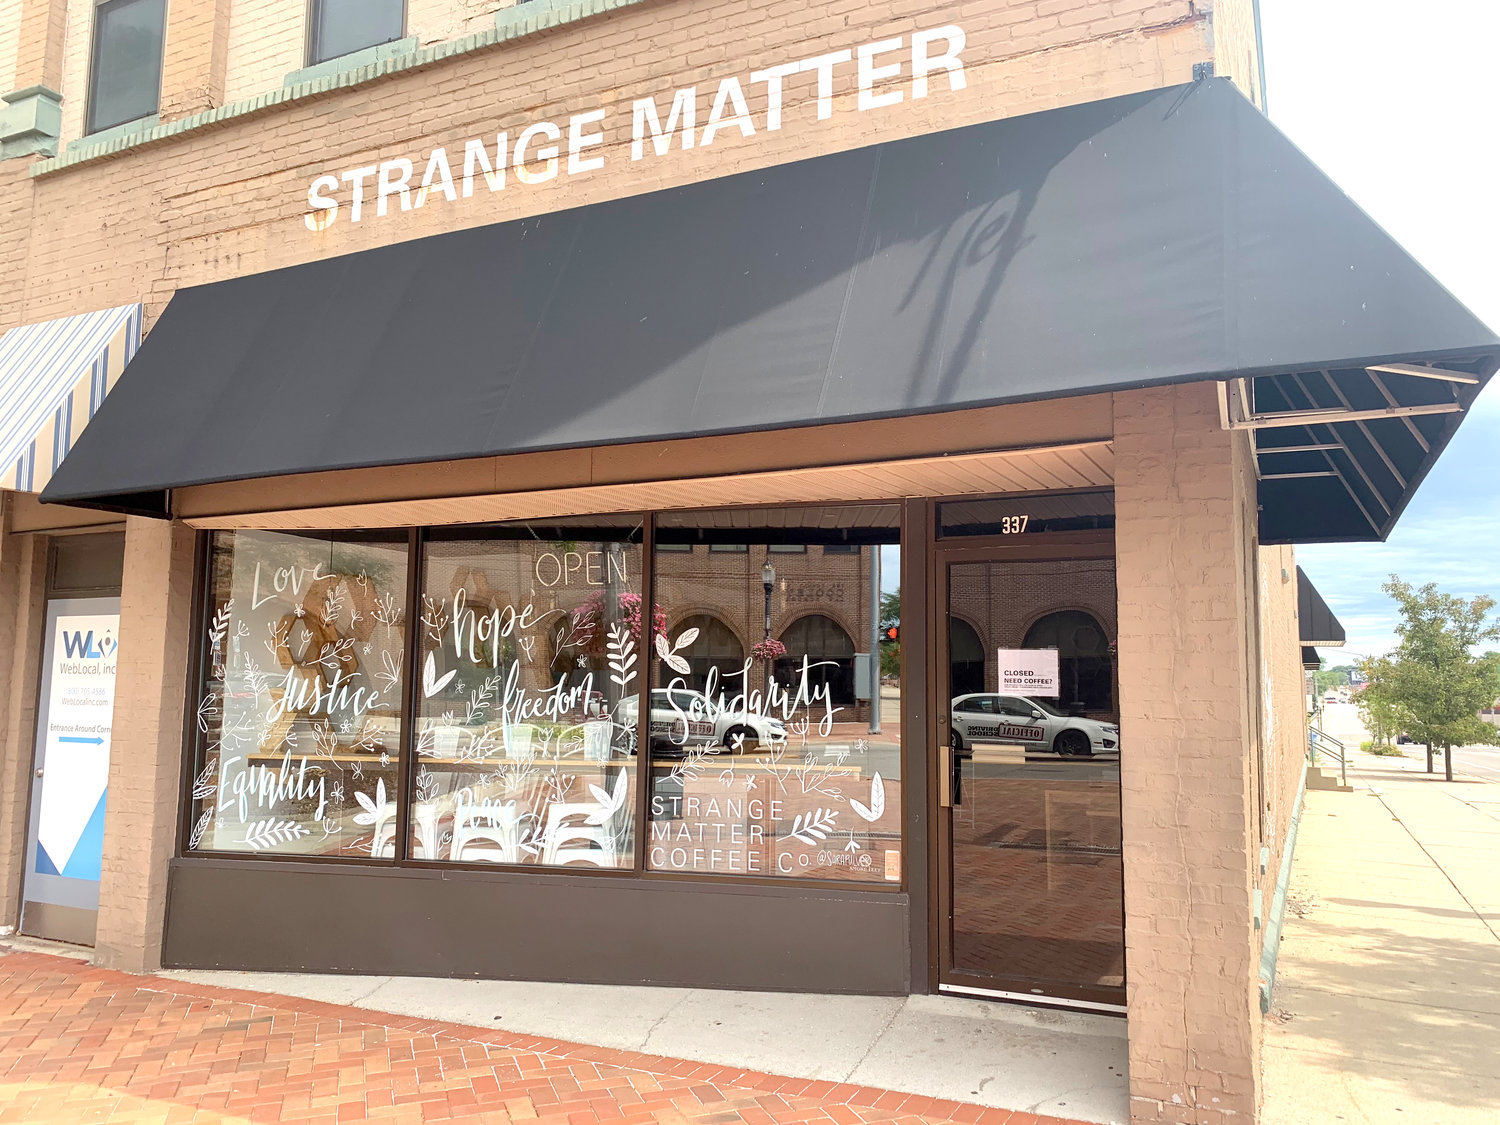 Strange Matter Coffee closed its downtown Lansing location on Washington Square last week, but the local chain is still offering curbside sales and deliveries from its cafe on East Michigan Avenue.